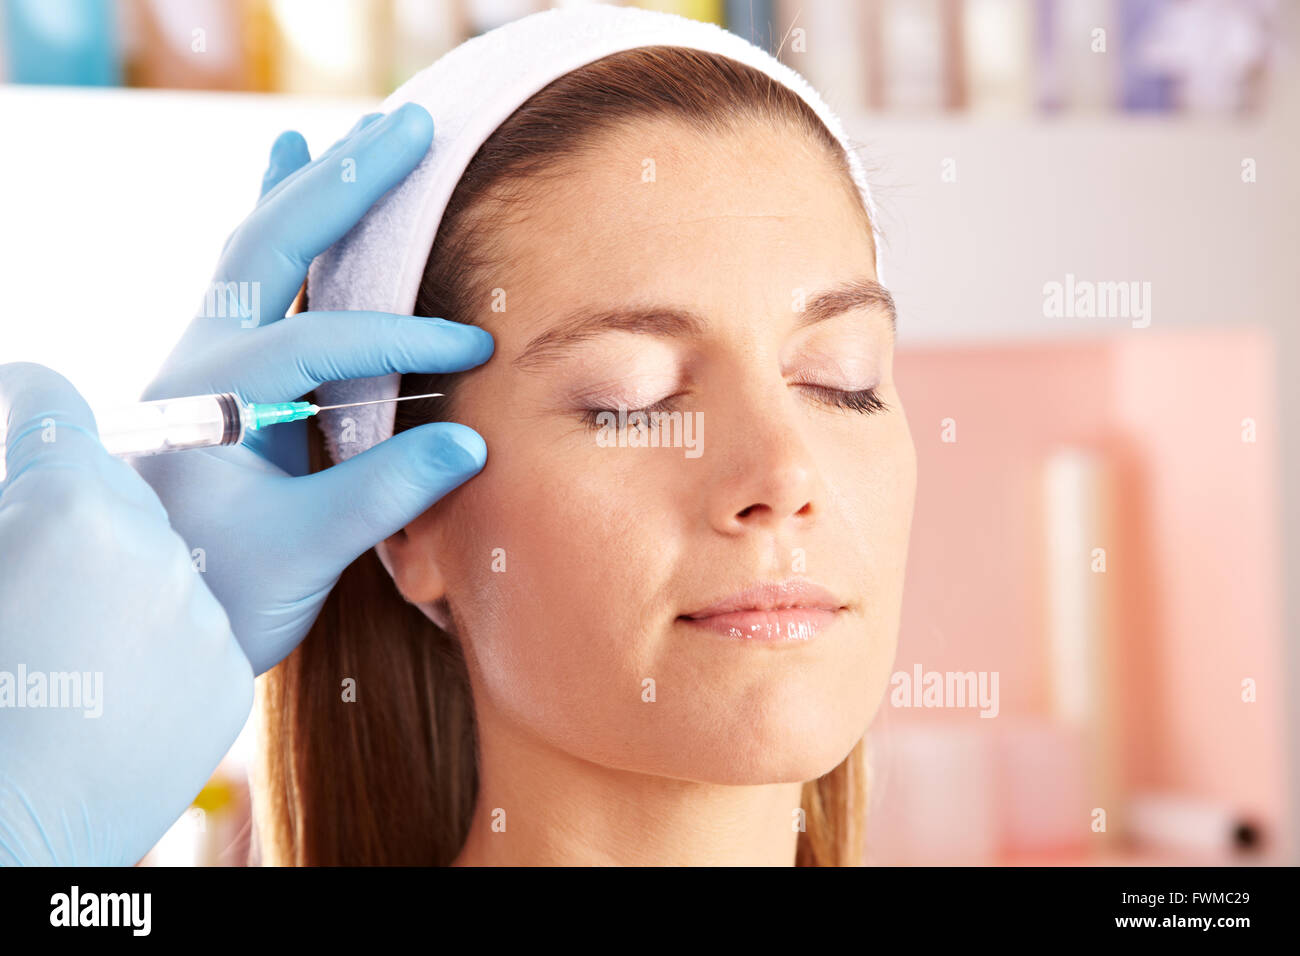 Woman in beauty clinic getting botox injection to remove eye wrinkles Stock Photo